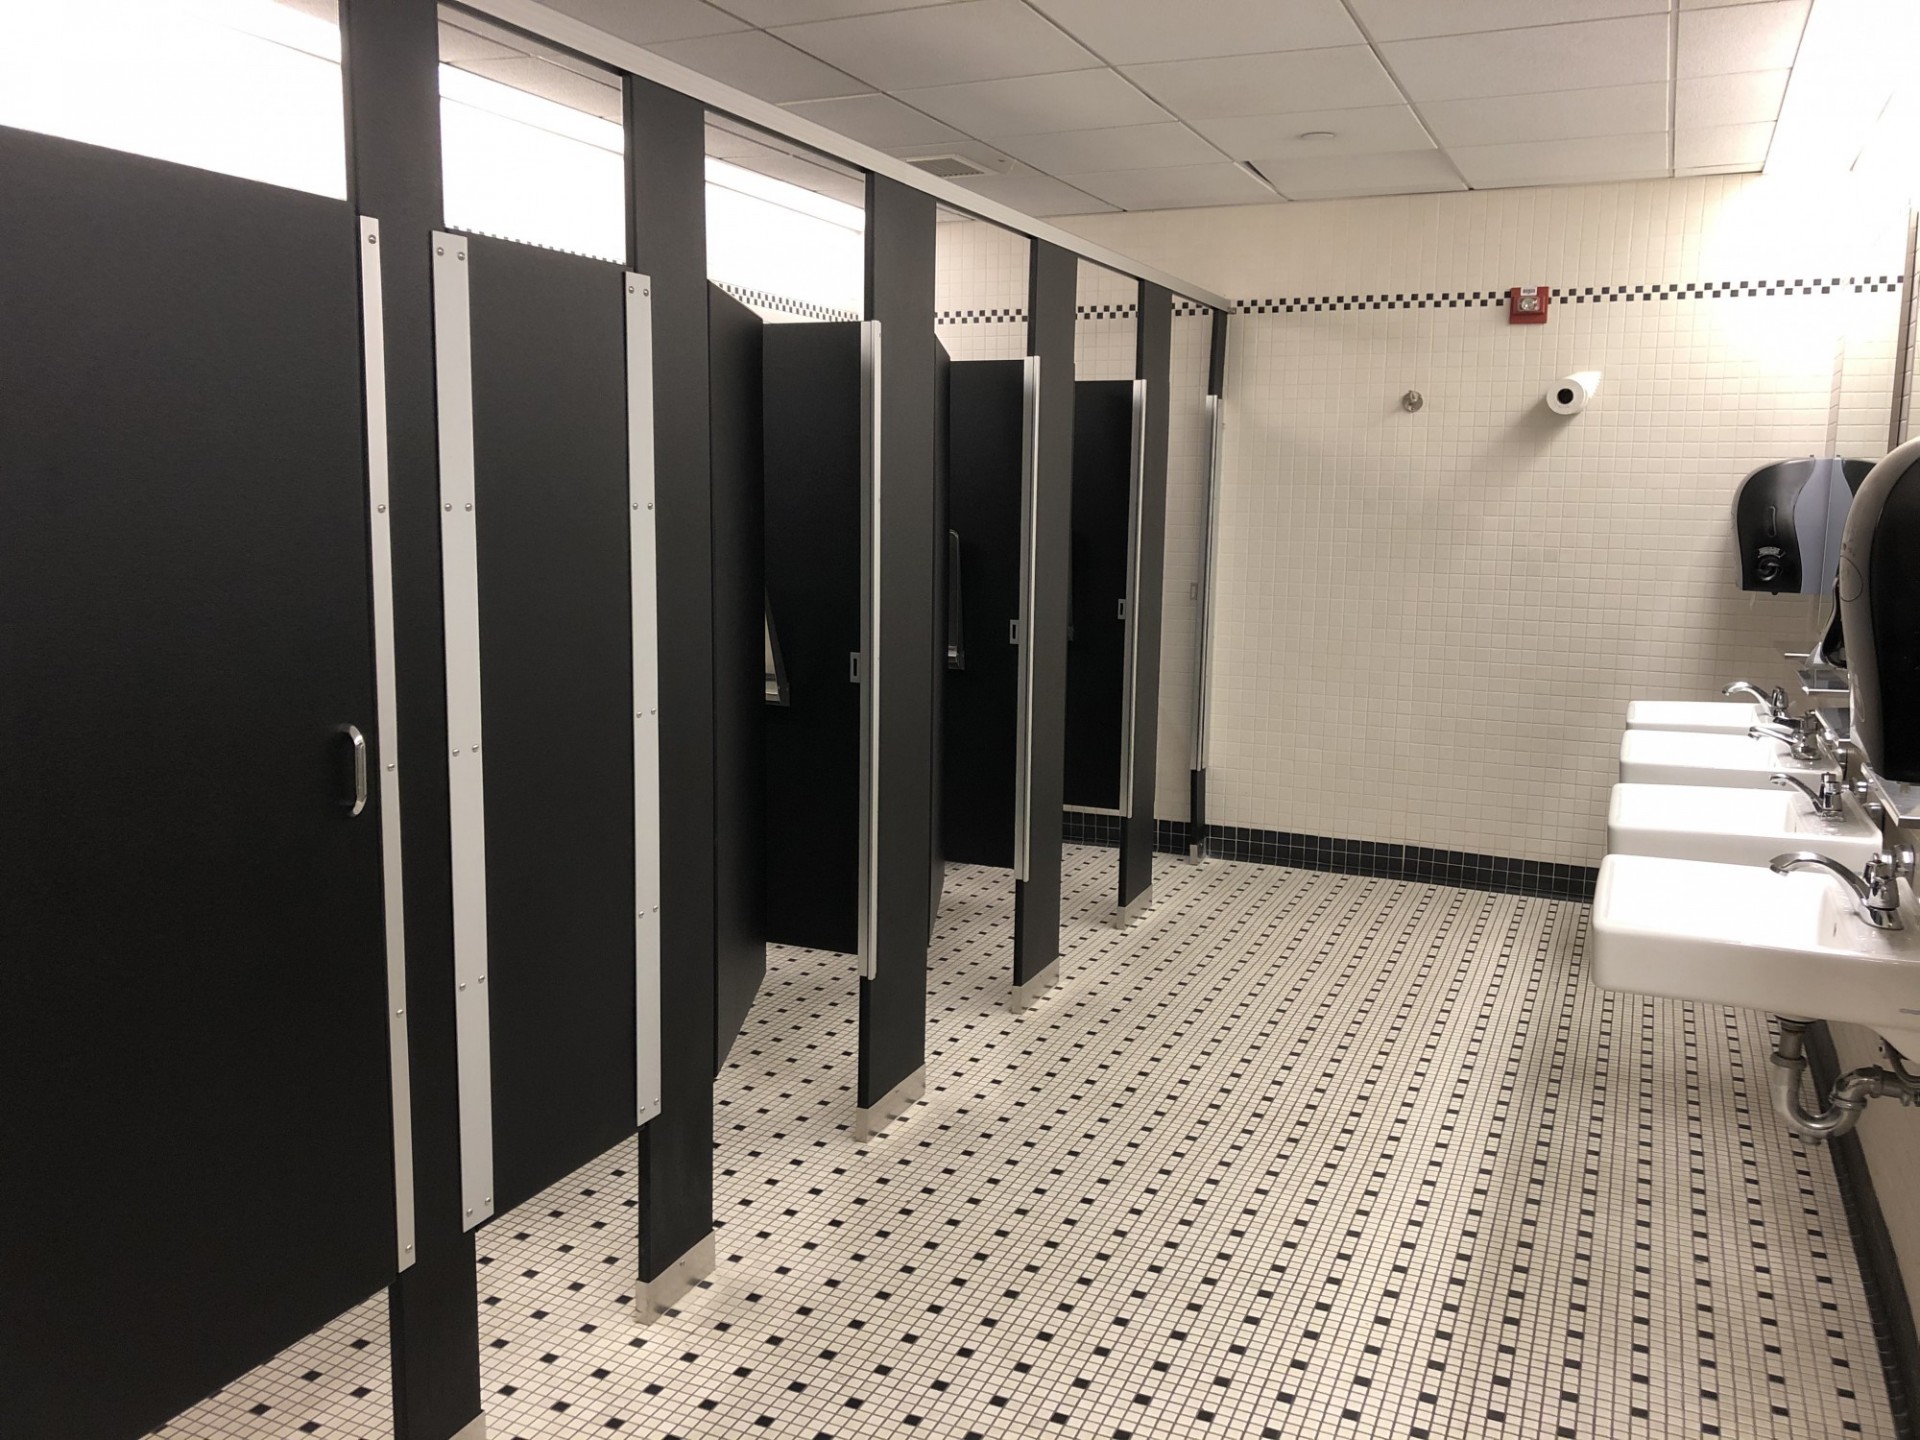 New partitions were installed in restrooms on the fourth floor of Butler Library.